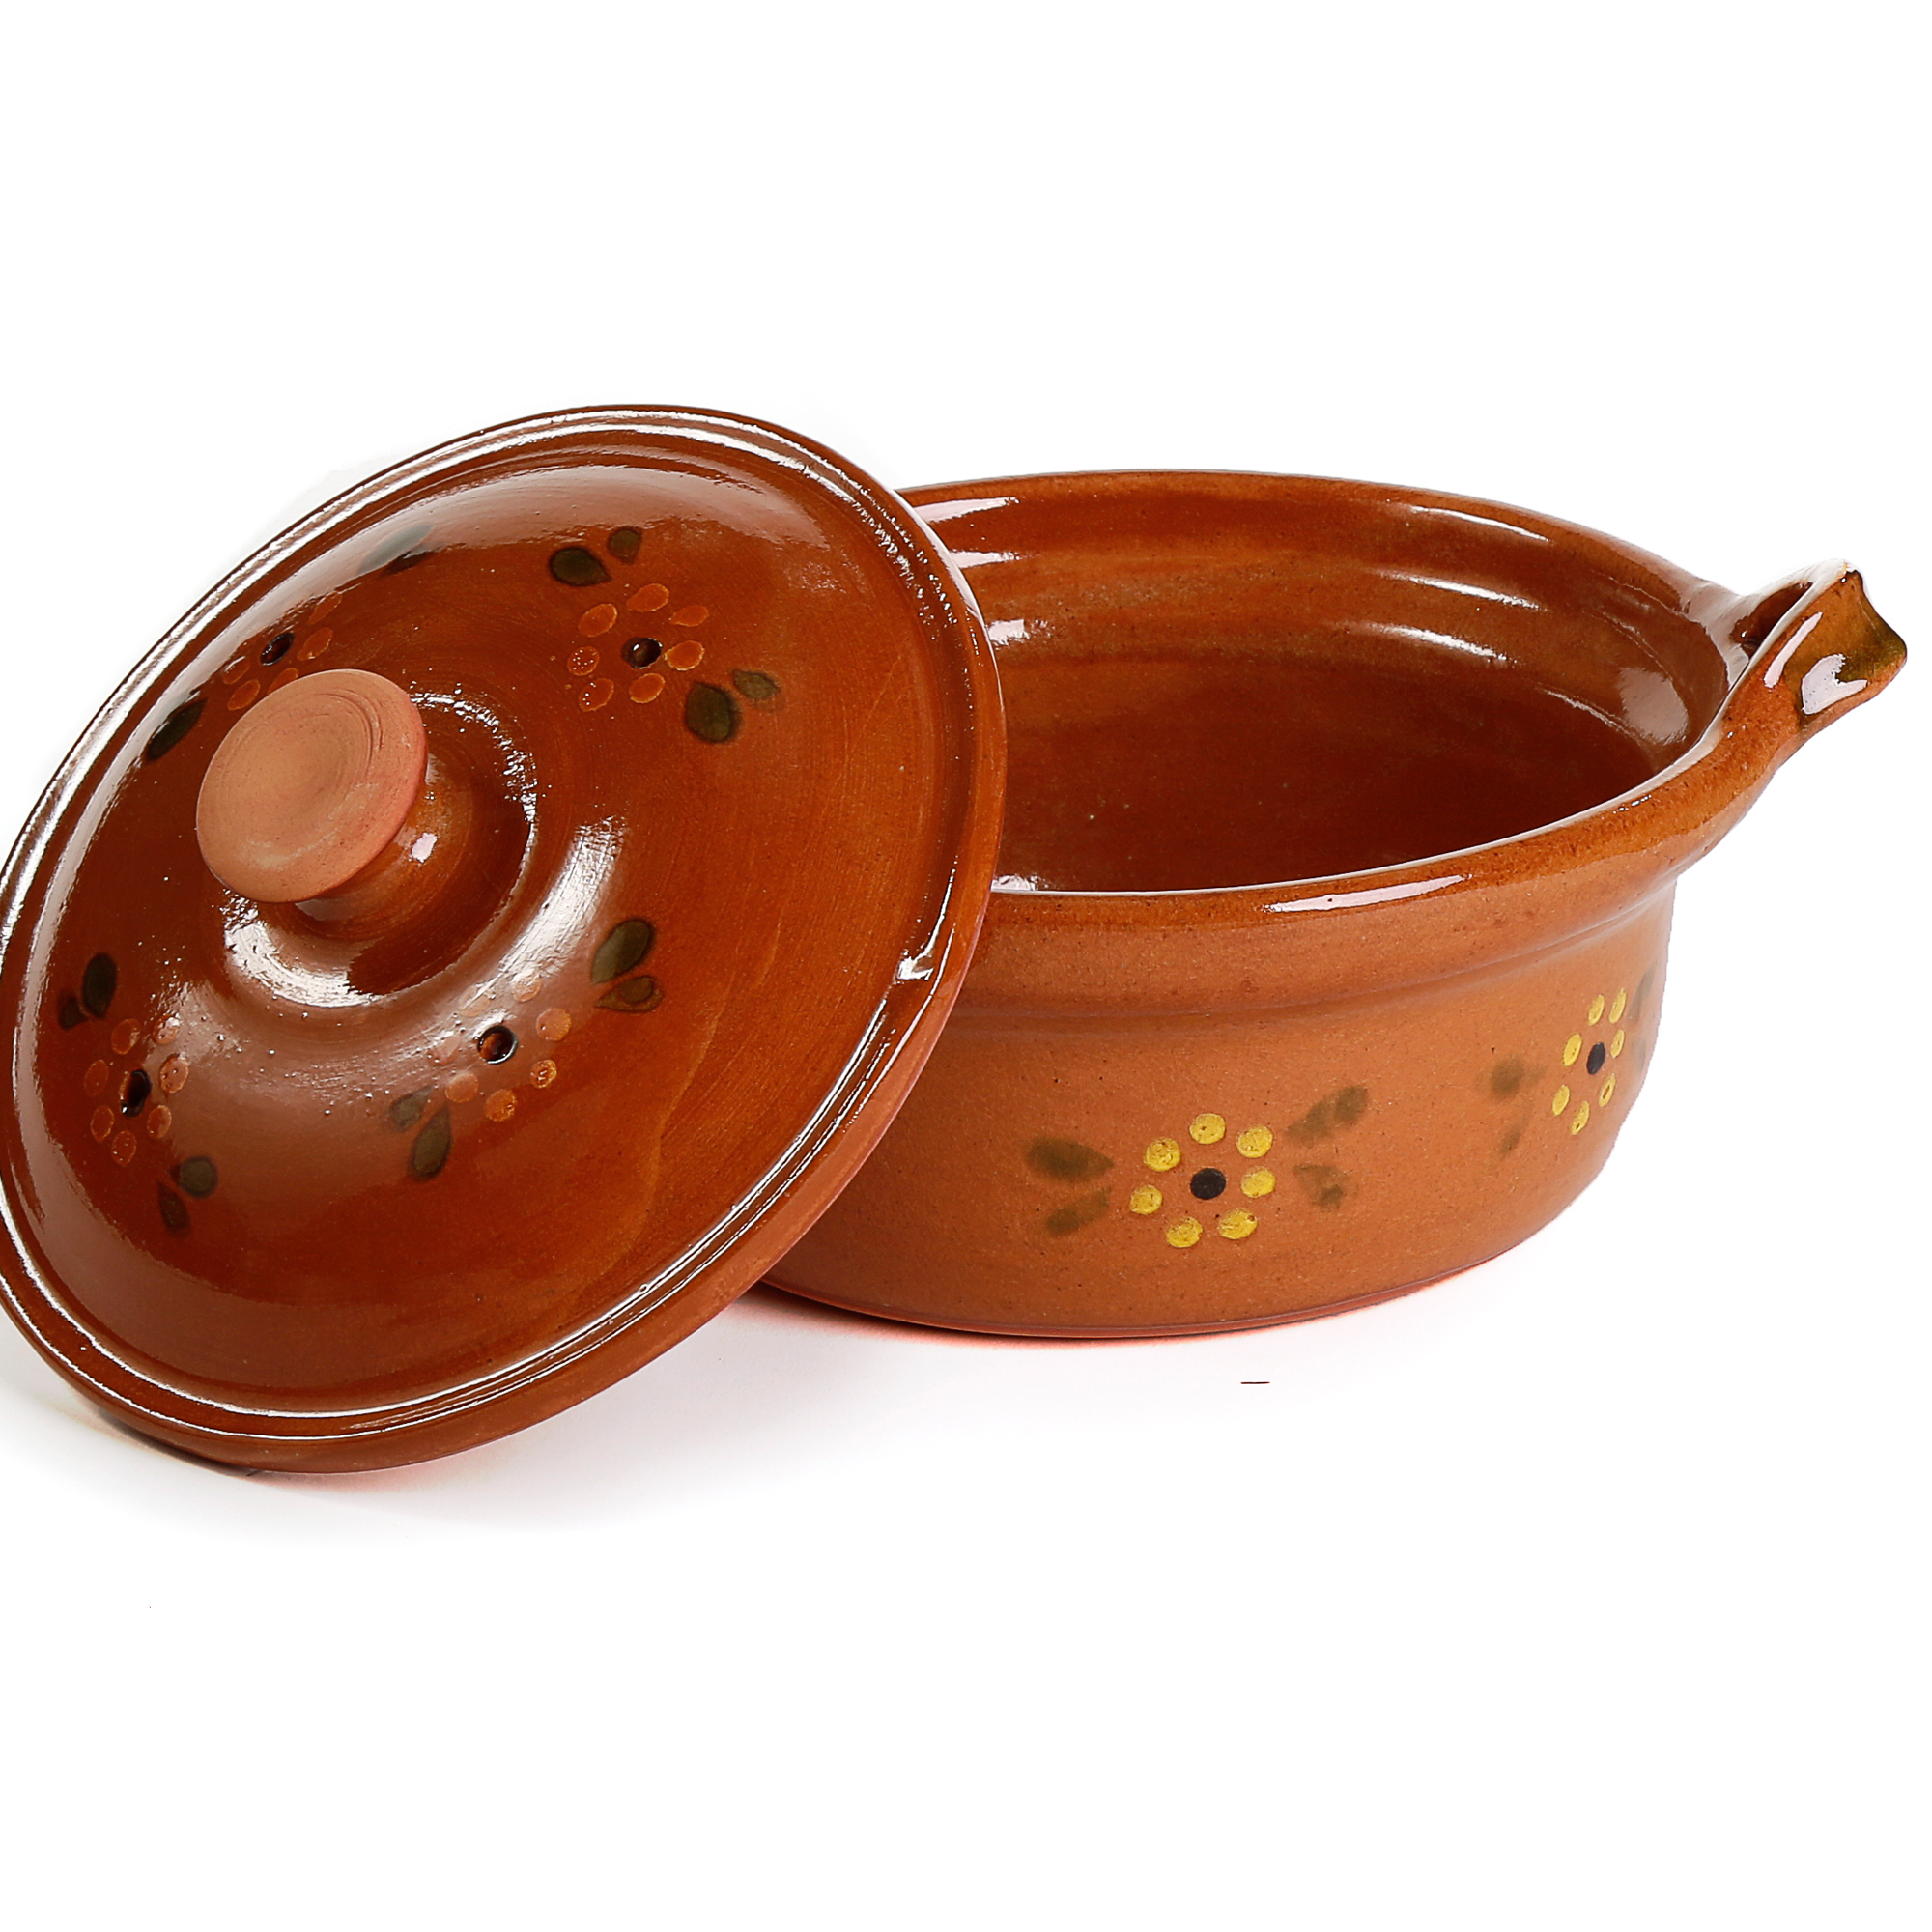 https://ancientcookware.com/images/stories/virtuemart/product/mex_3030_08_02_large4.jpg